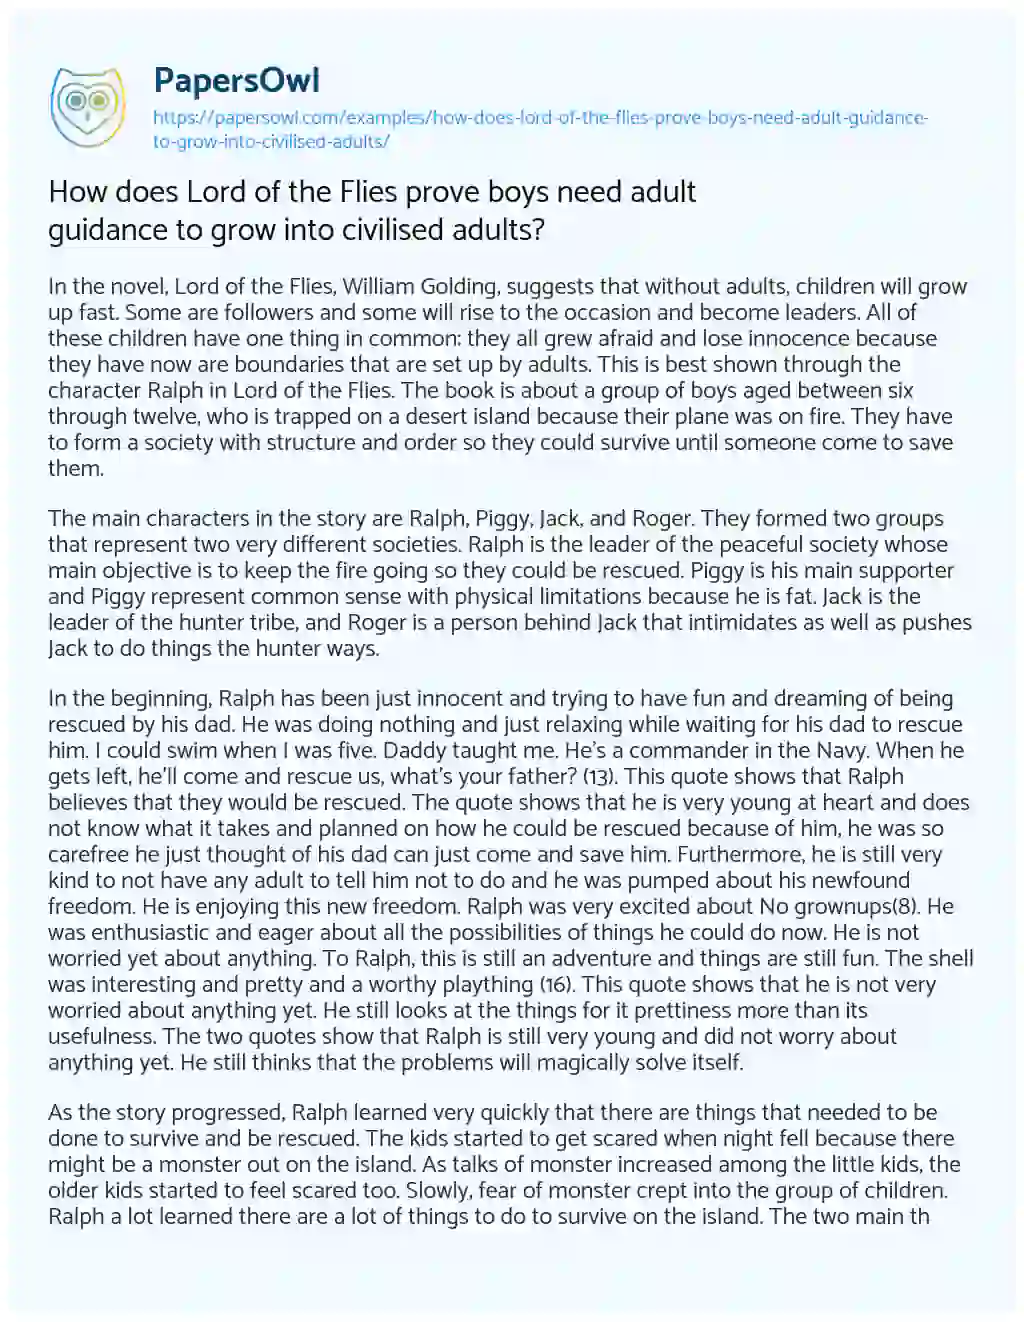 Essay on How does Lord of the Flies Prove Boys Need Adult Guidance to Grow into Civilised Adults?